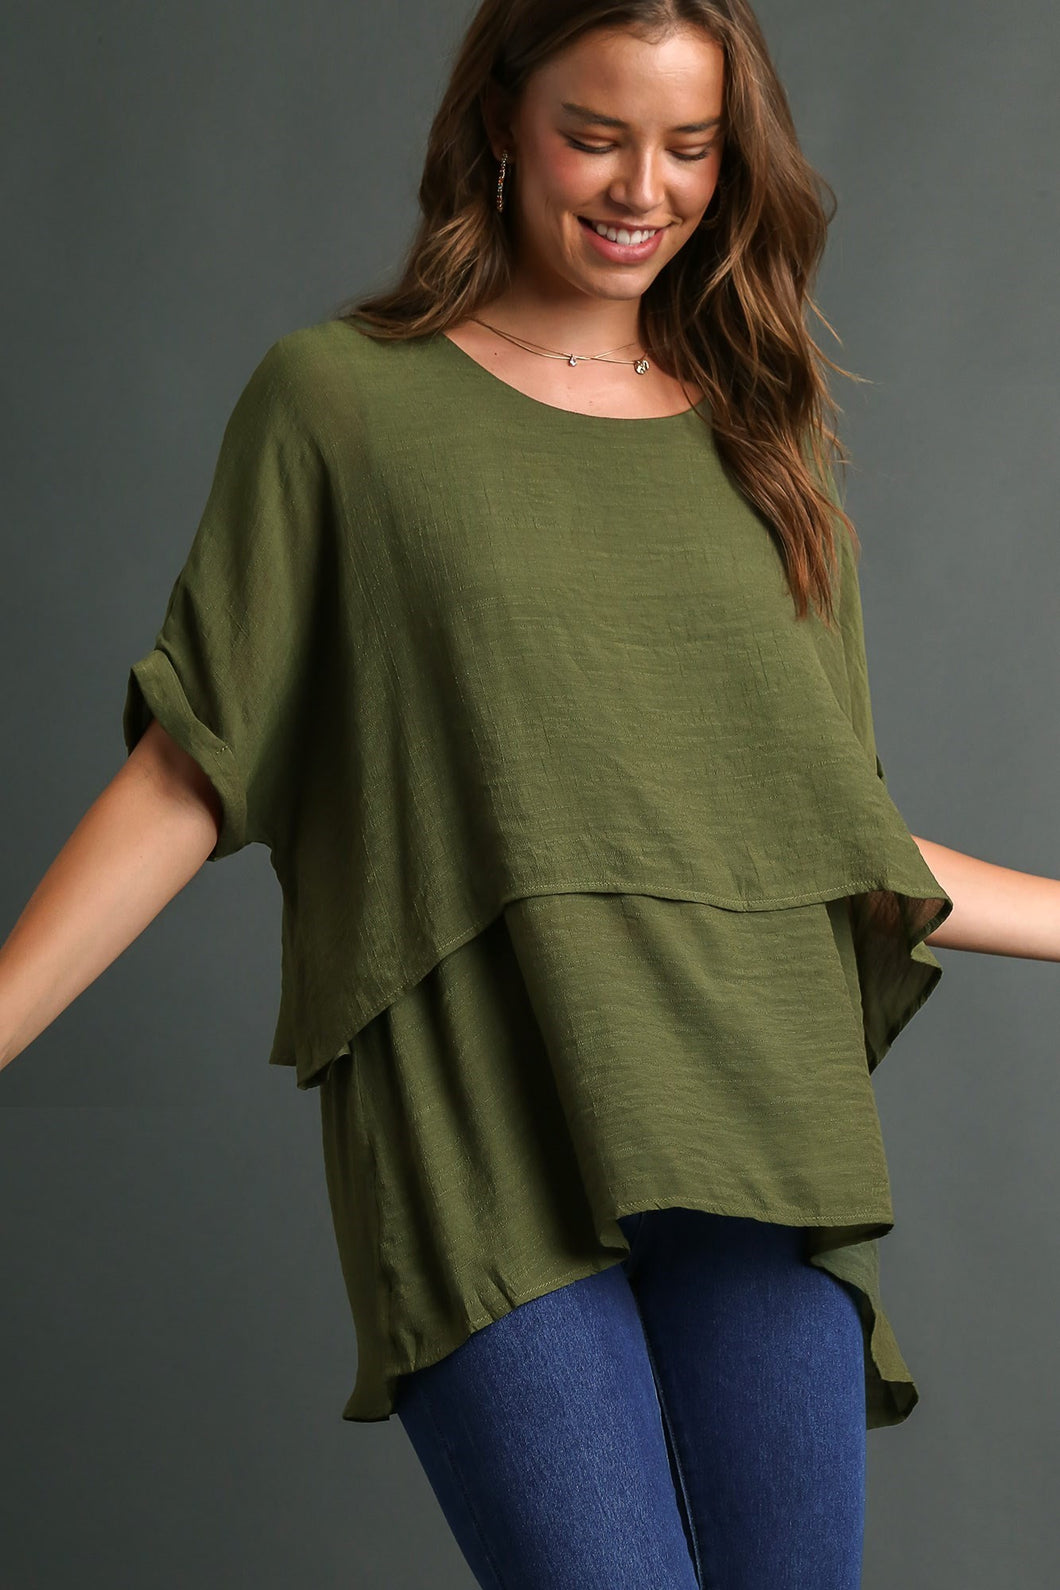 Umgee Lightweight Layered Tunic in Olive Tops Umgee   